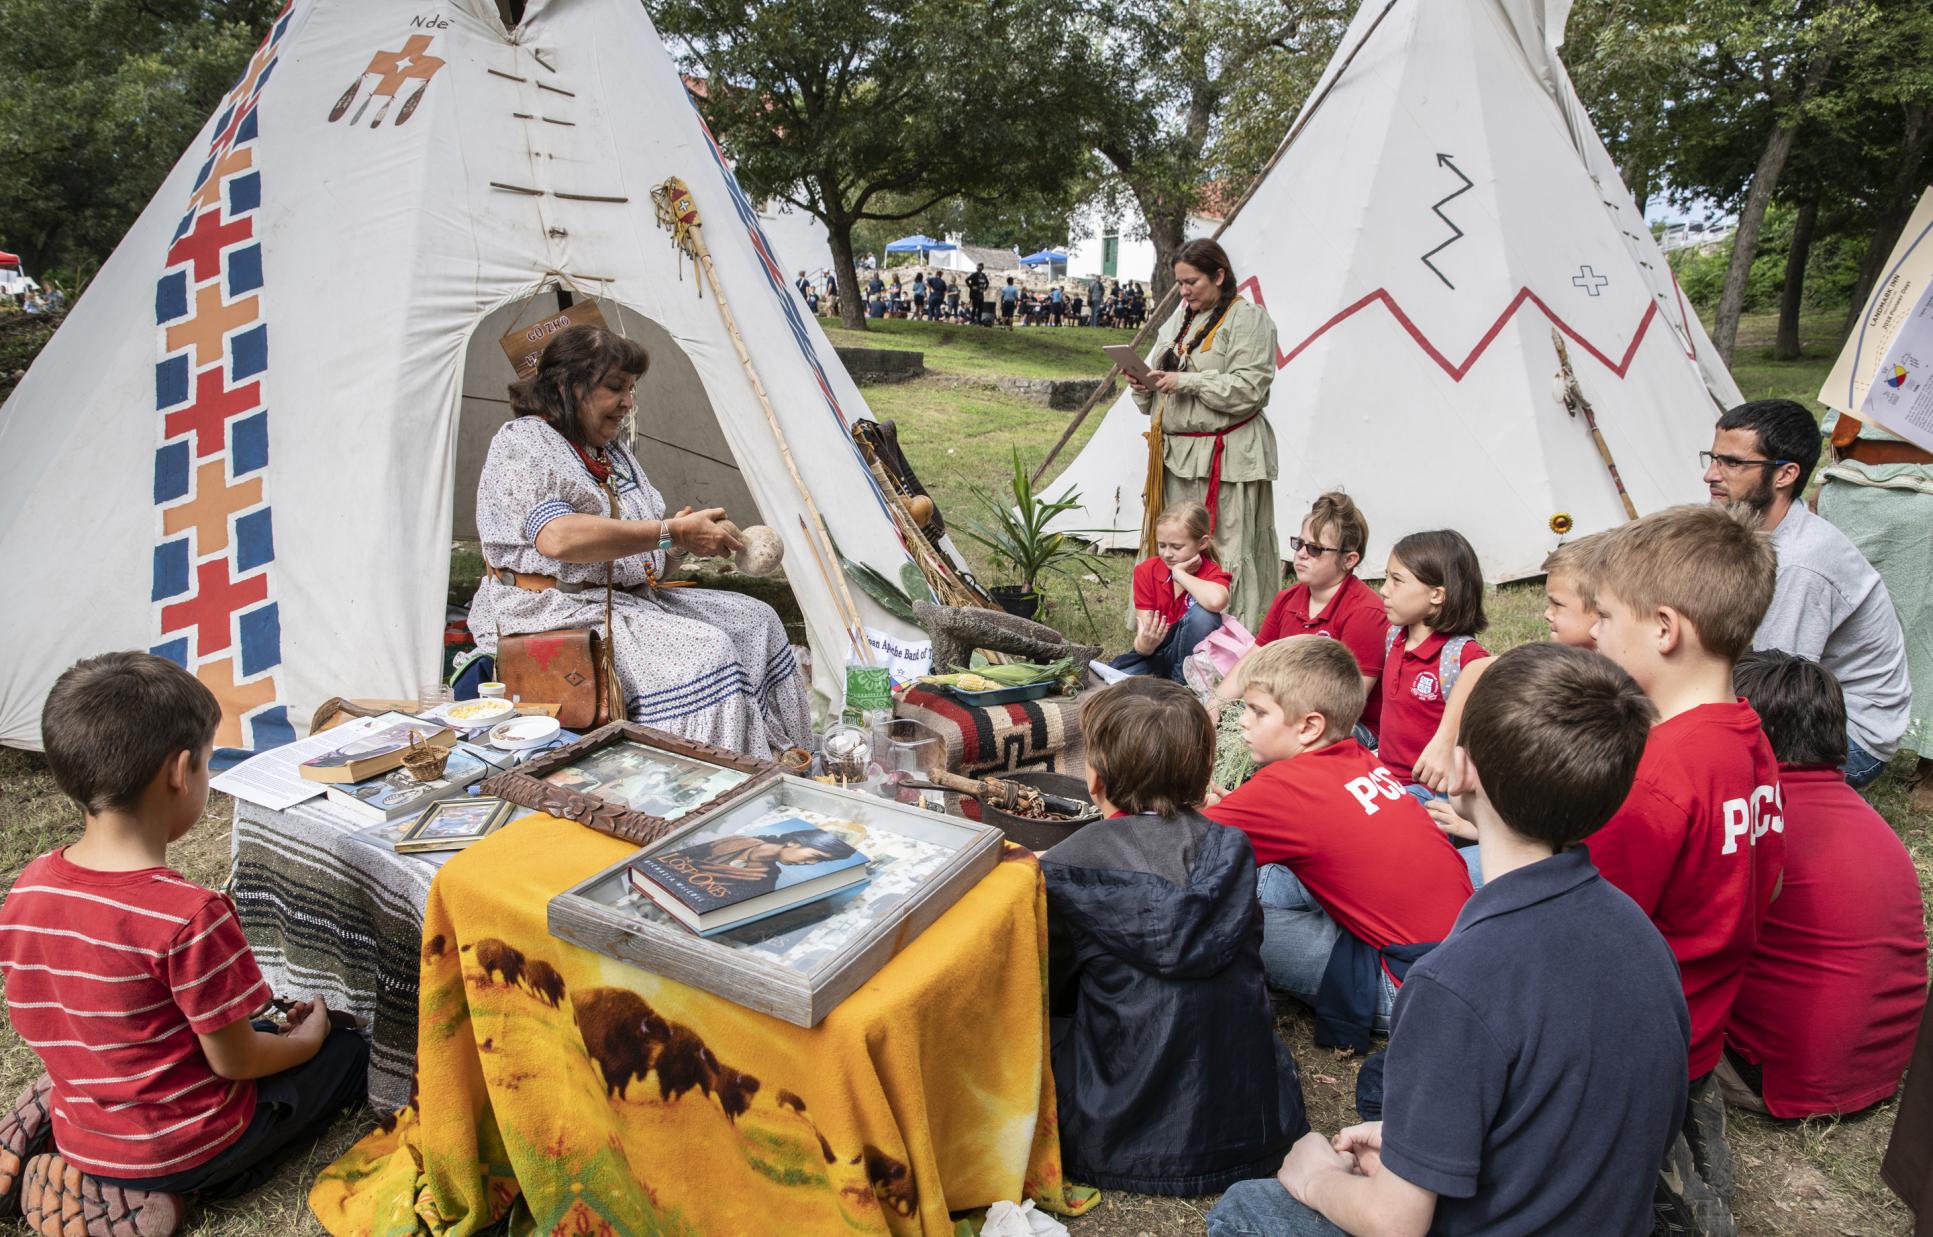 Native American reenactor talking to children during a living history event